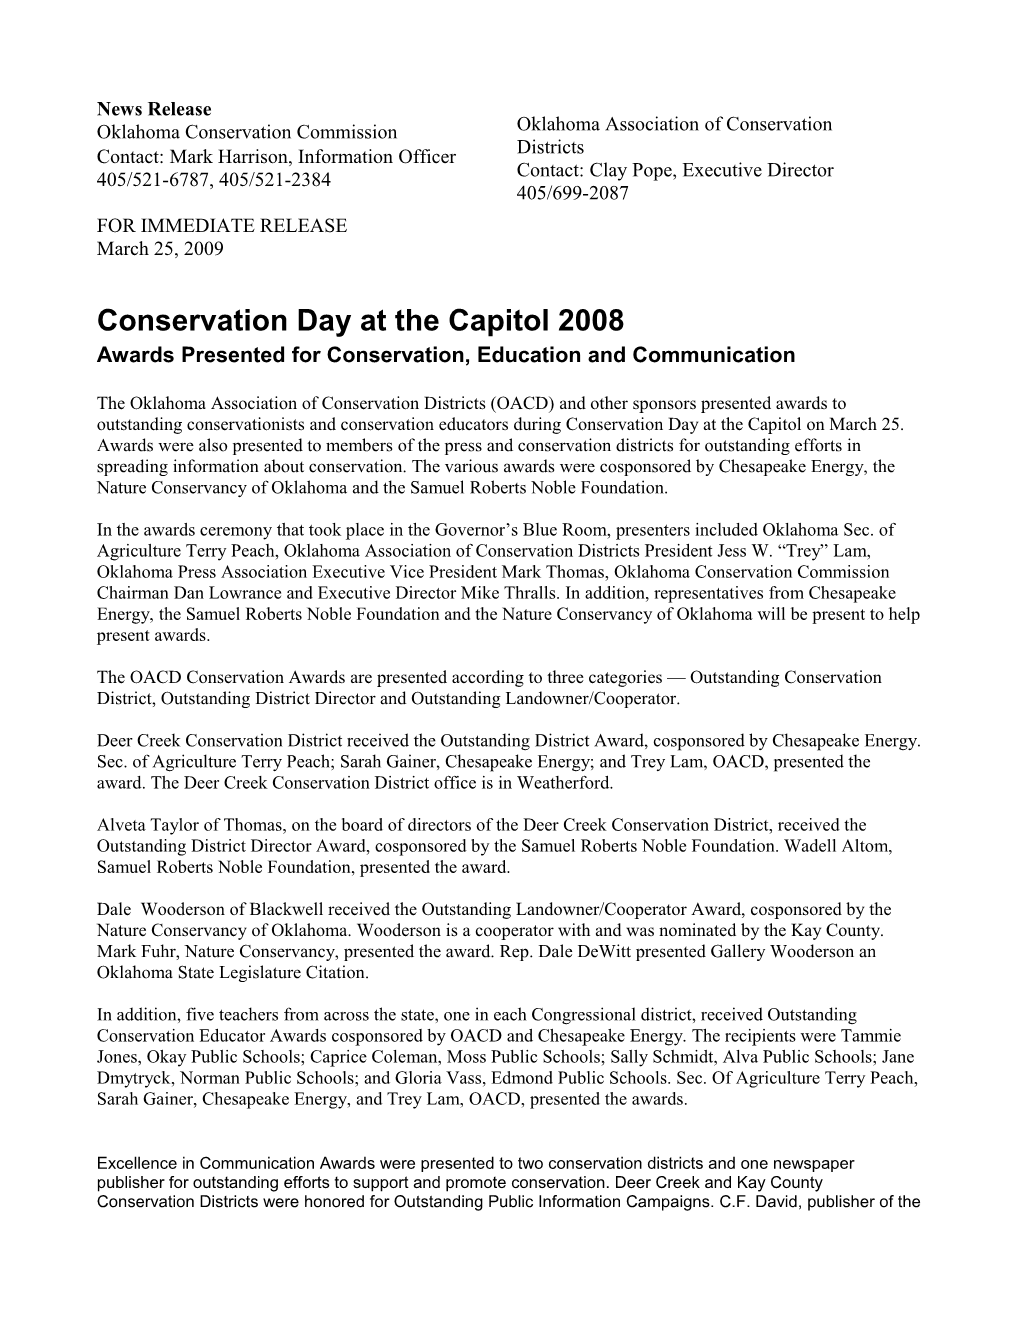 Conservation Day at the Capitol 2008